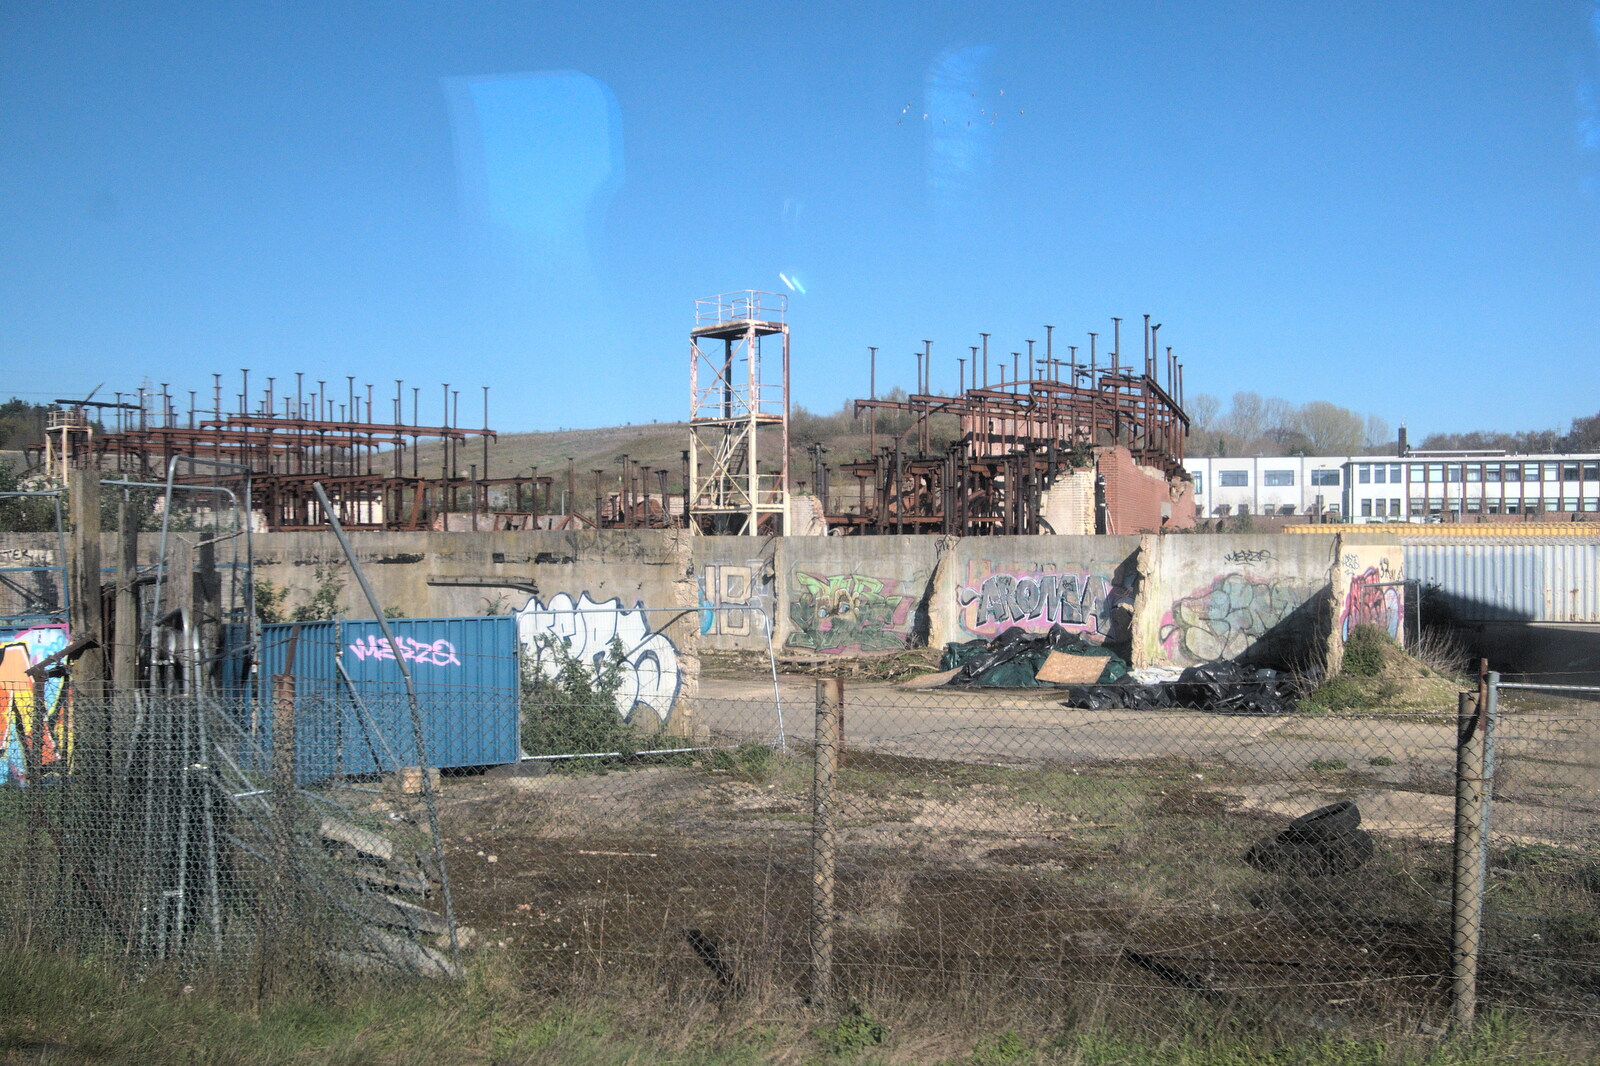 Another glimpse of the burned-down Fison's from A Day in New Milton, Hampshire - 3rd April 2023